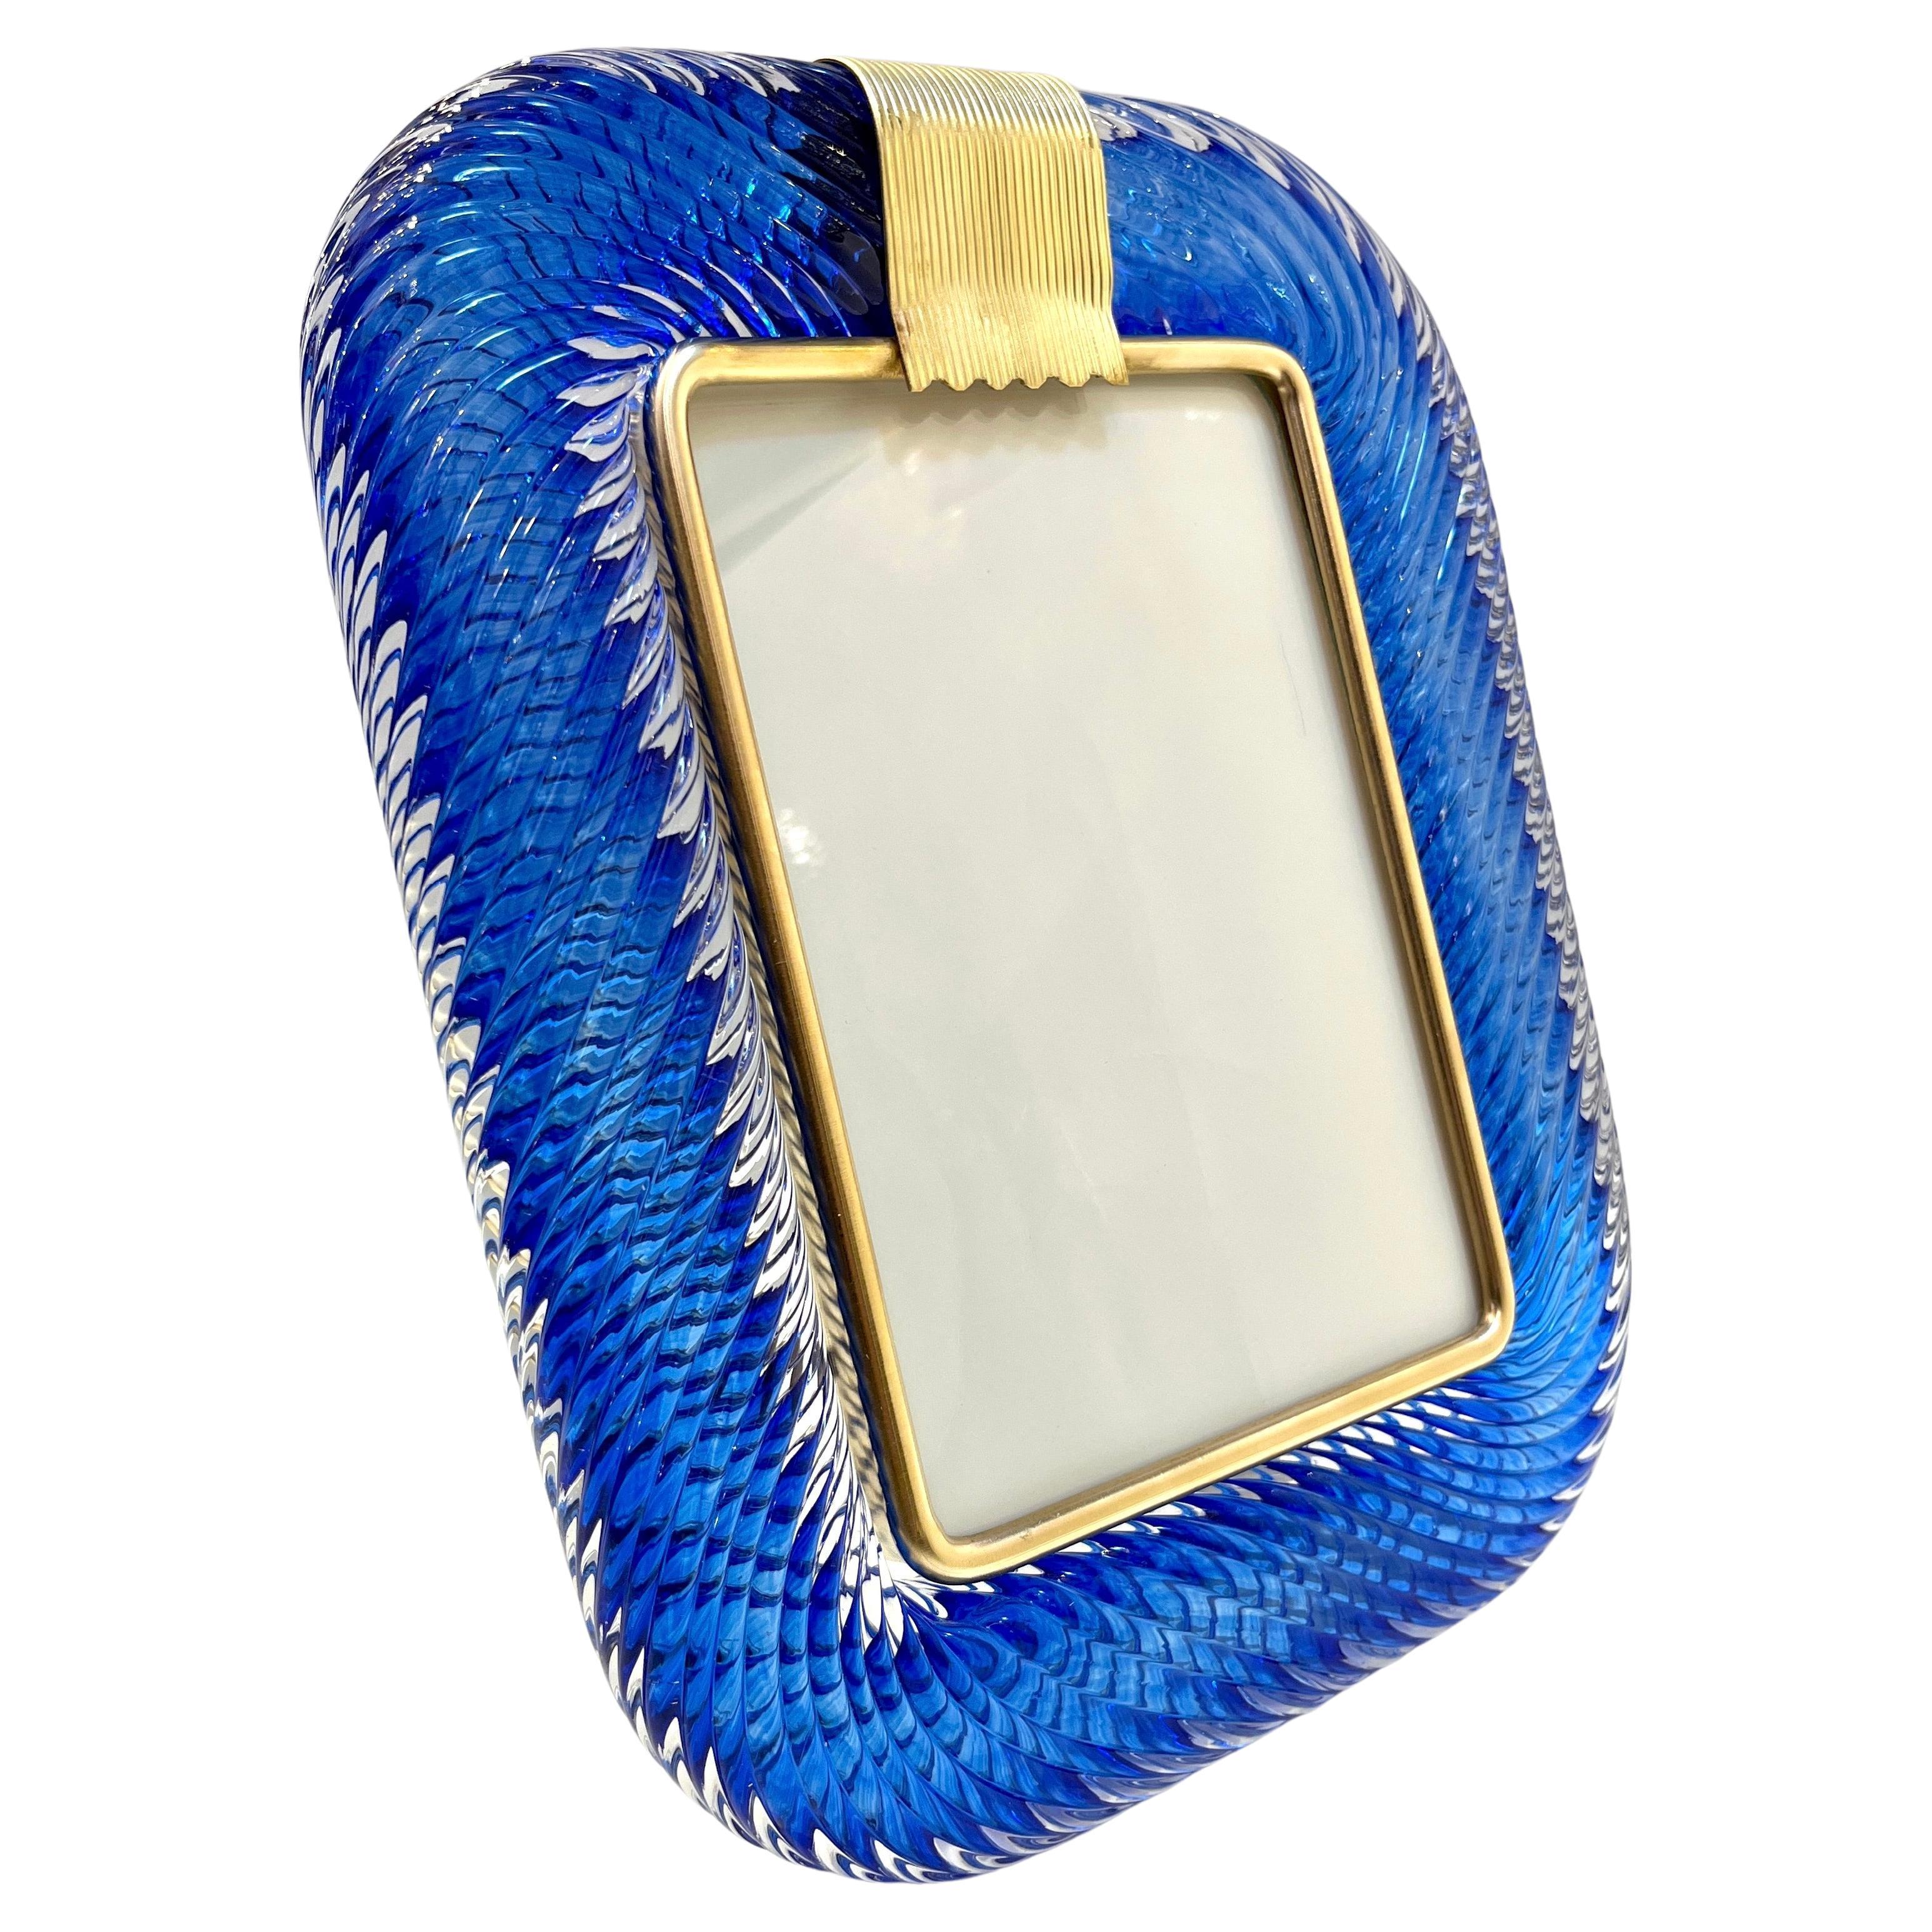 2000s Barovier Toso Italian Royal Blue Twisted Murano Glass Brass Picture Frame For Sale